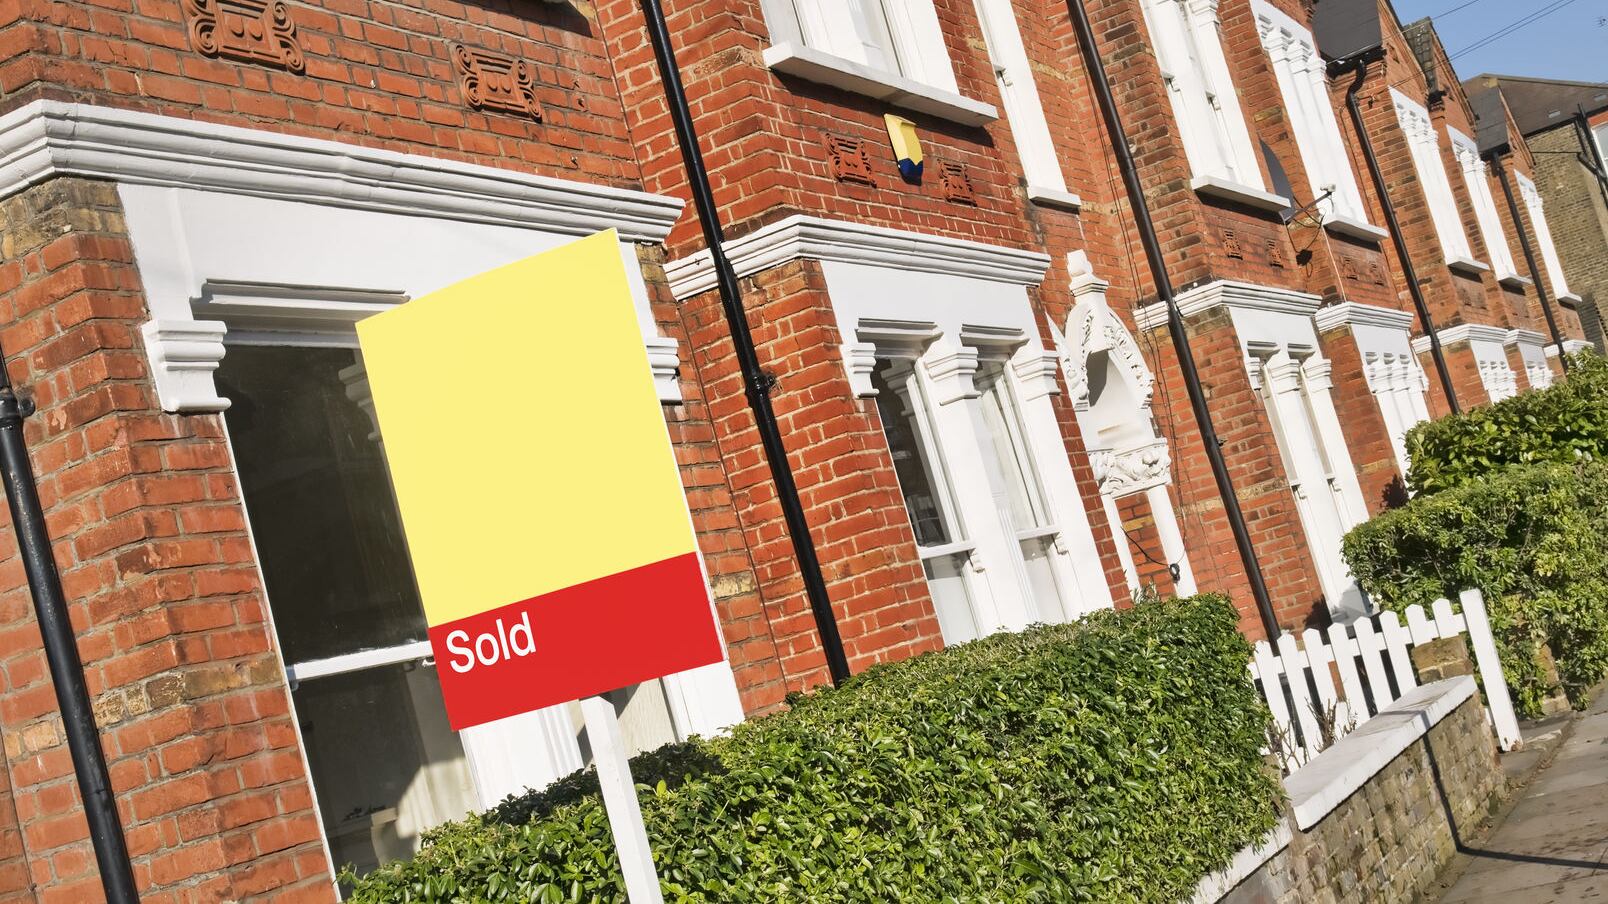 Property insiders expect activity in the north's housing market to remain busy as the stamp duty holiday ends.  